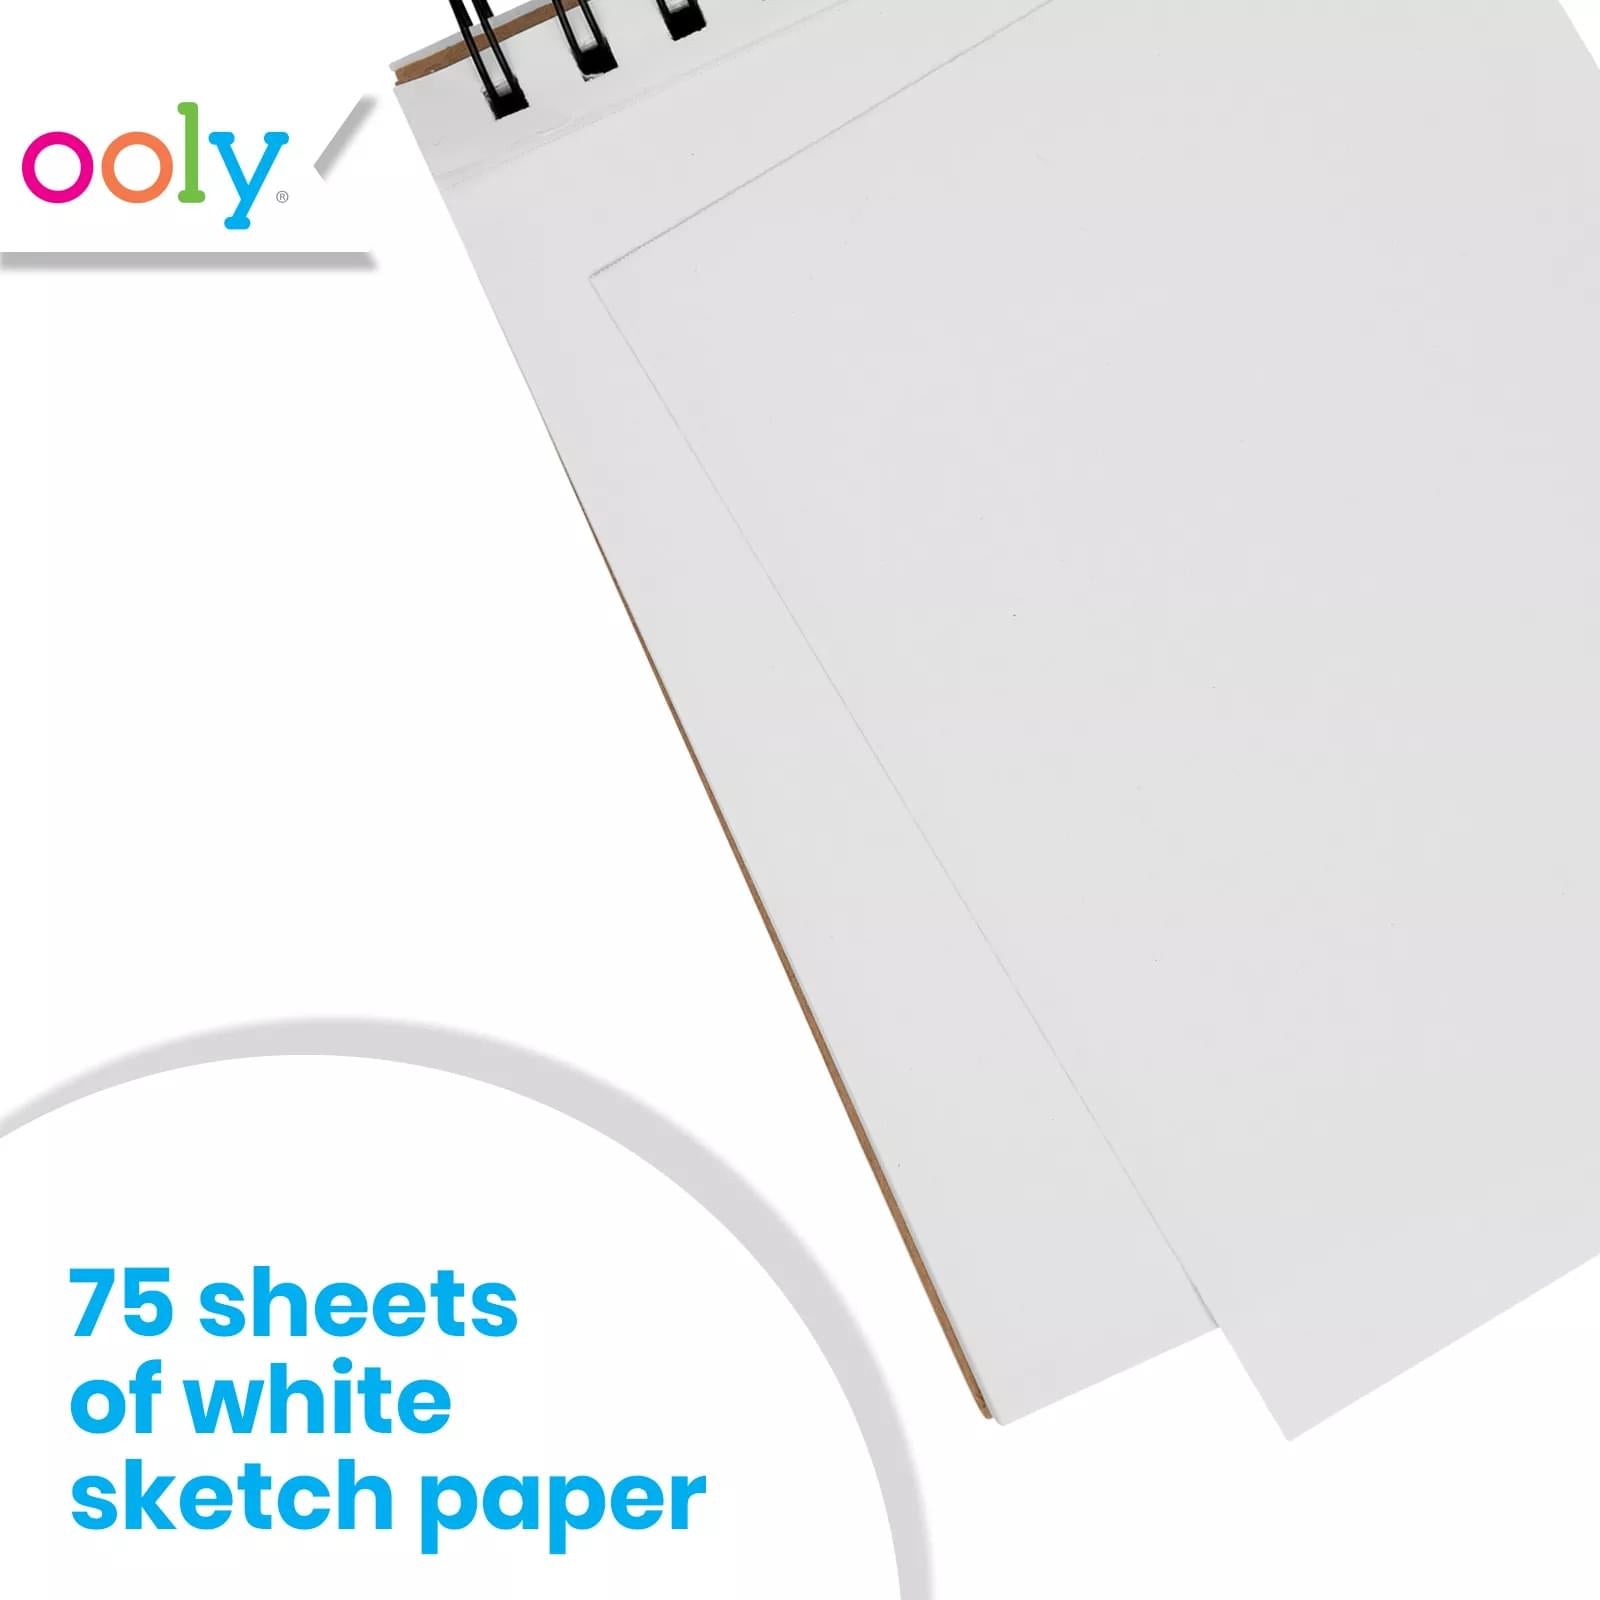 D.I.Y. Sketchbook - Small White Paper (5x7.5)